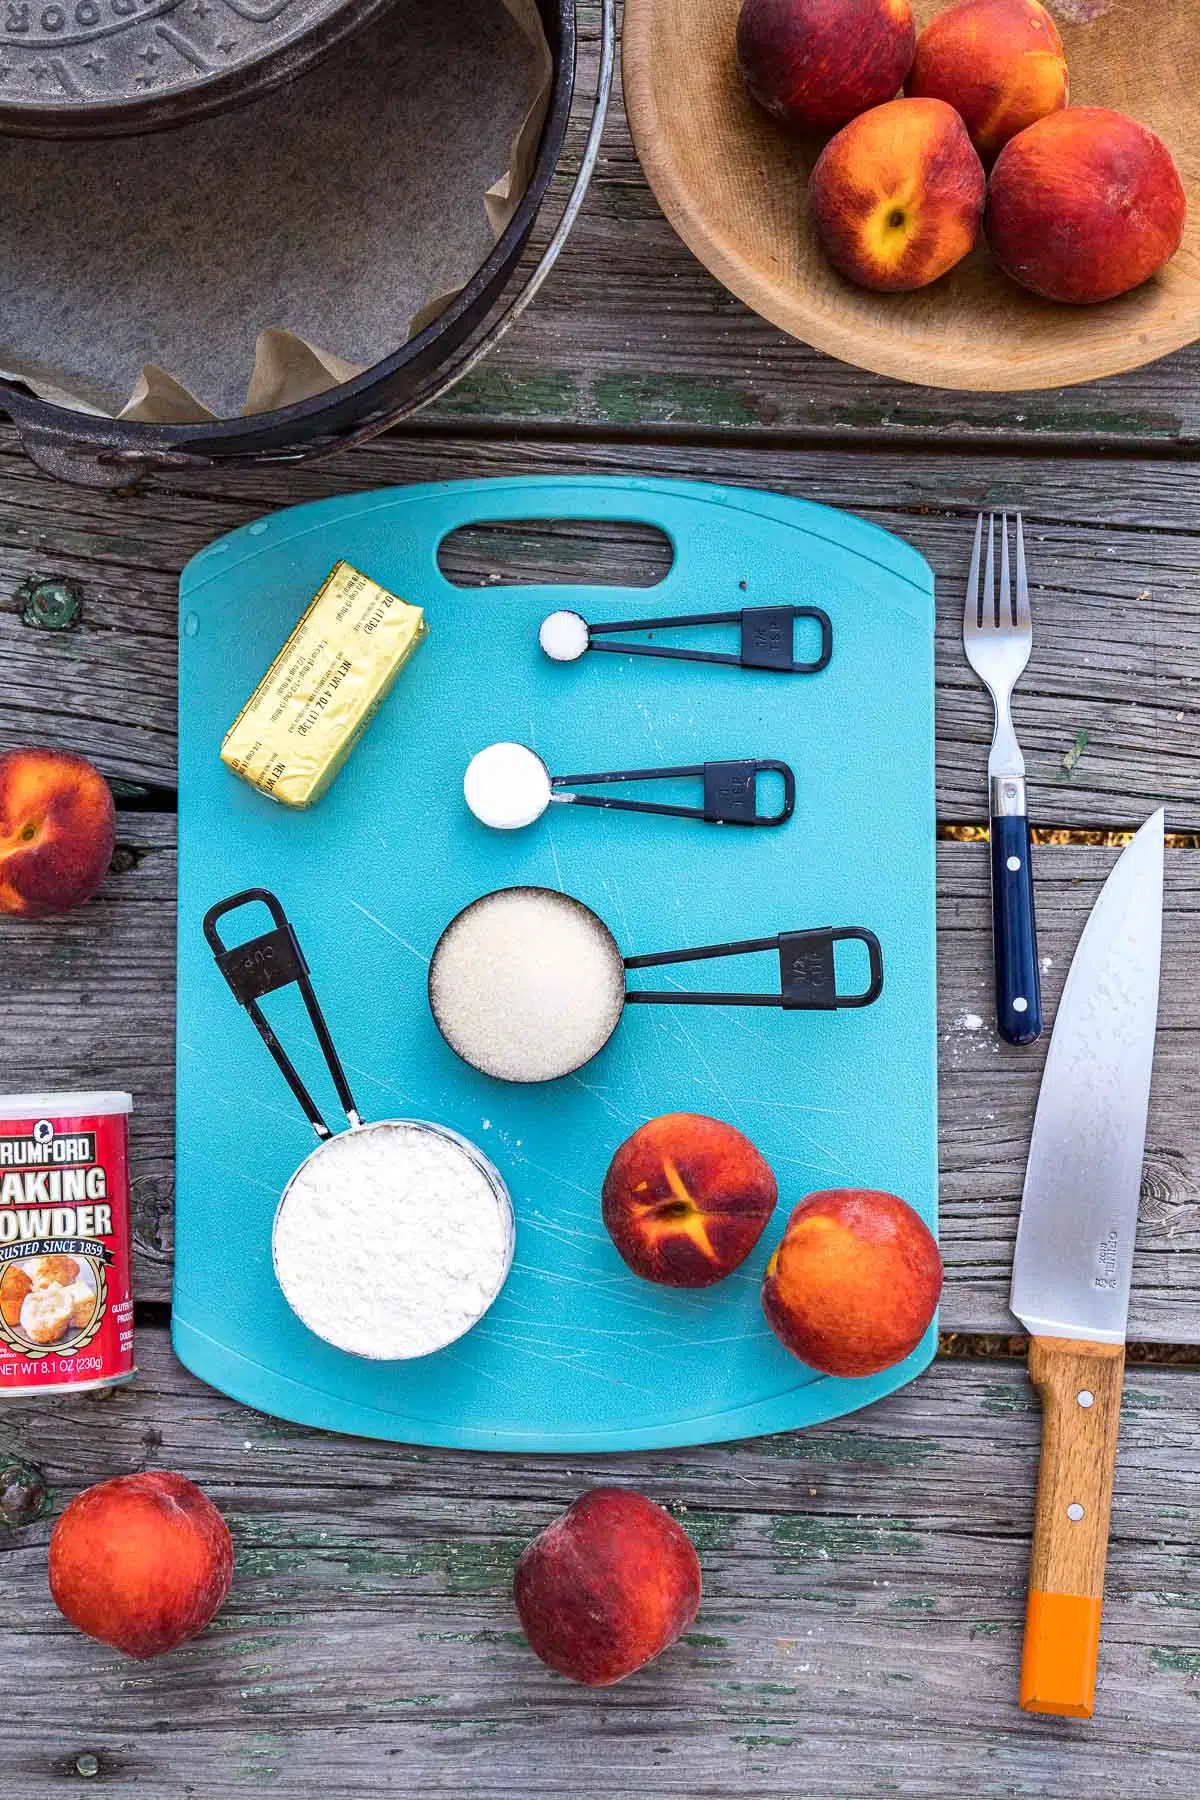 Ingredients for peach cooker on a cutting board